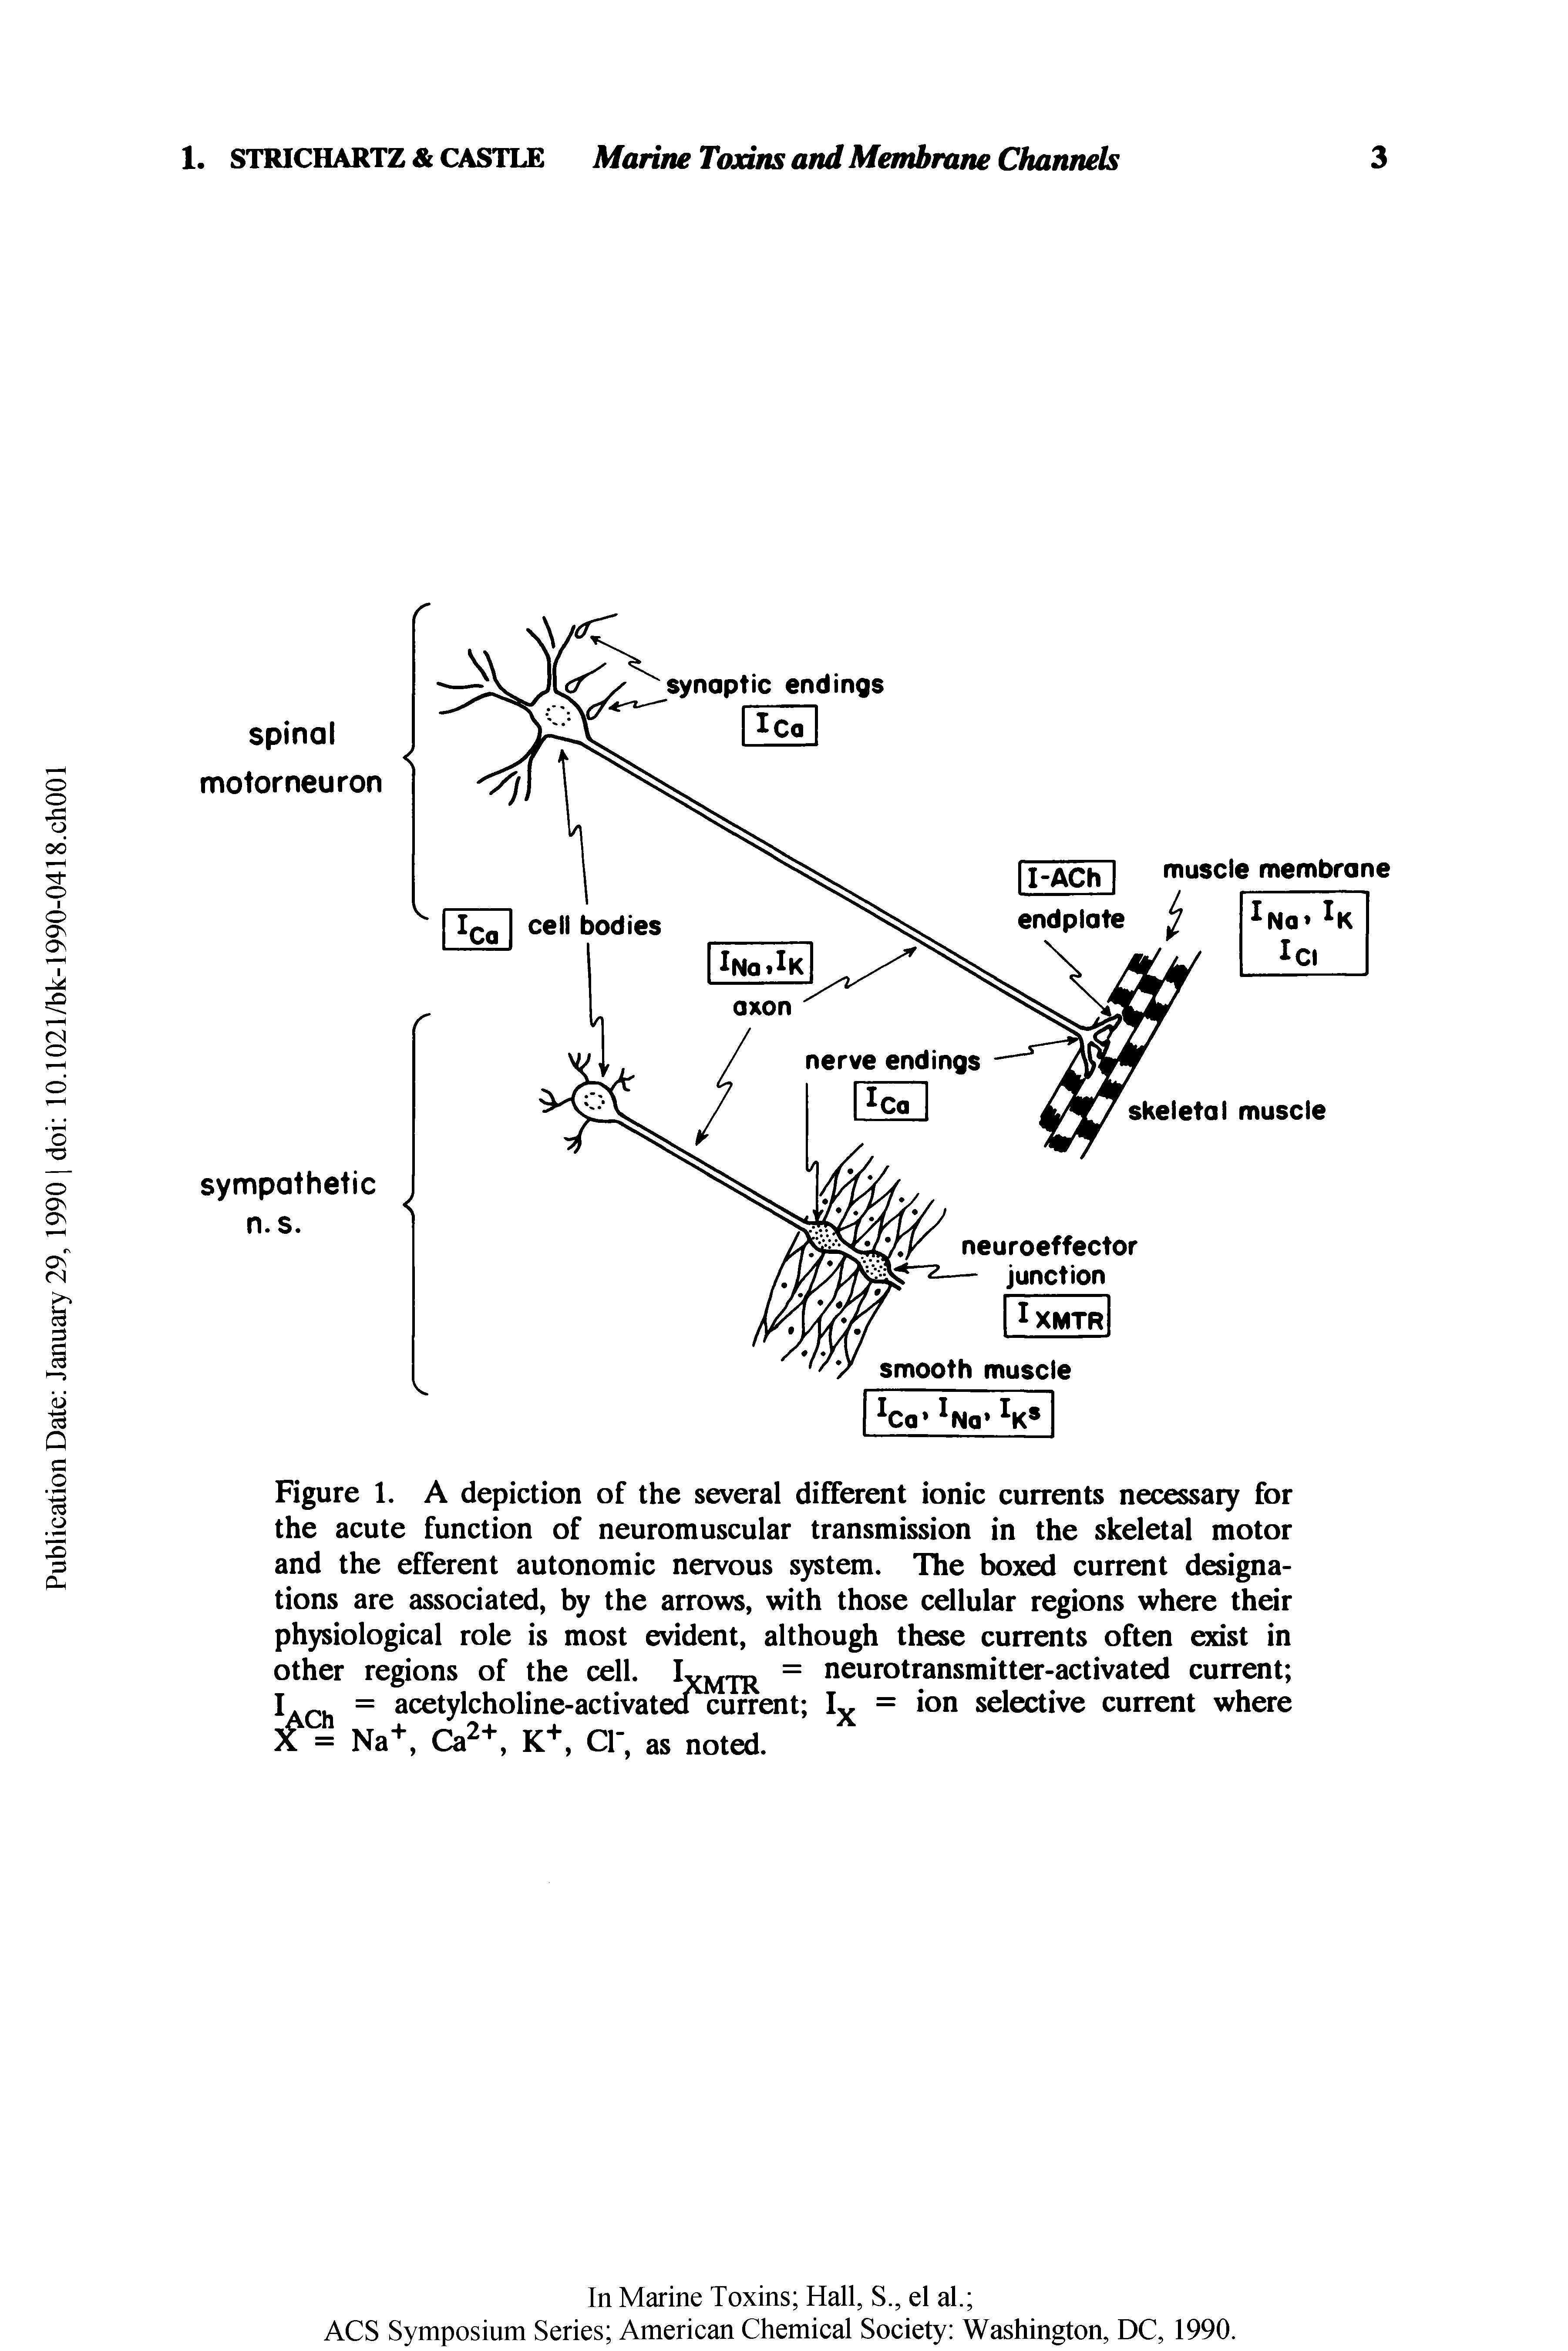 Figure 1. A depiction of the several different ionic currents necessary for the acute function of neuromuscular transmission in the skeletal motor and the efferent autonomic nervous system. The boxed current designations are associated, by the arrows, with those cellular regions where their physiological role is most evident, although these currents often exist in other regions of the cell. = neurotransmitter-activated current ...